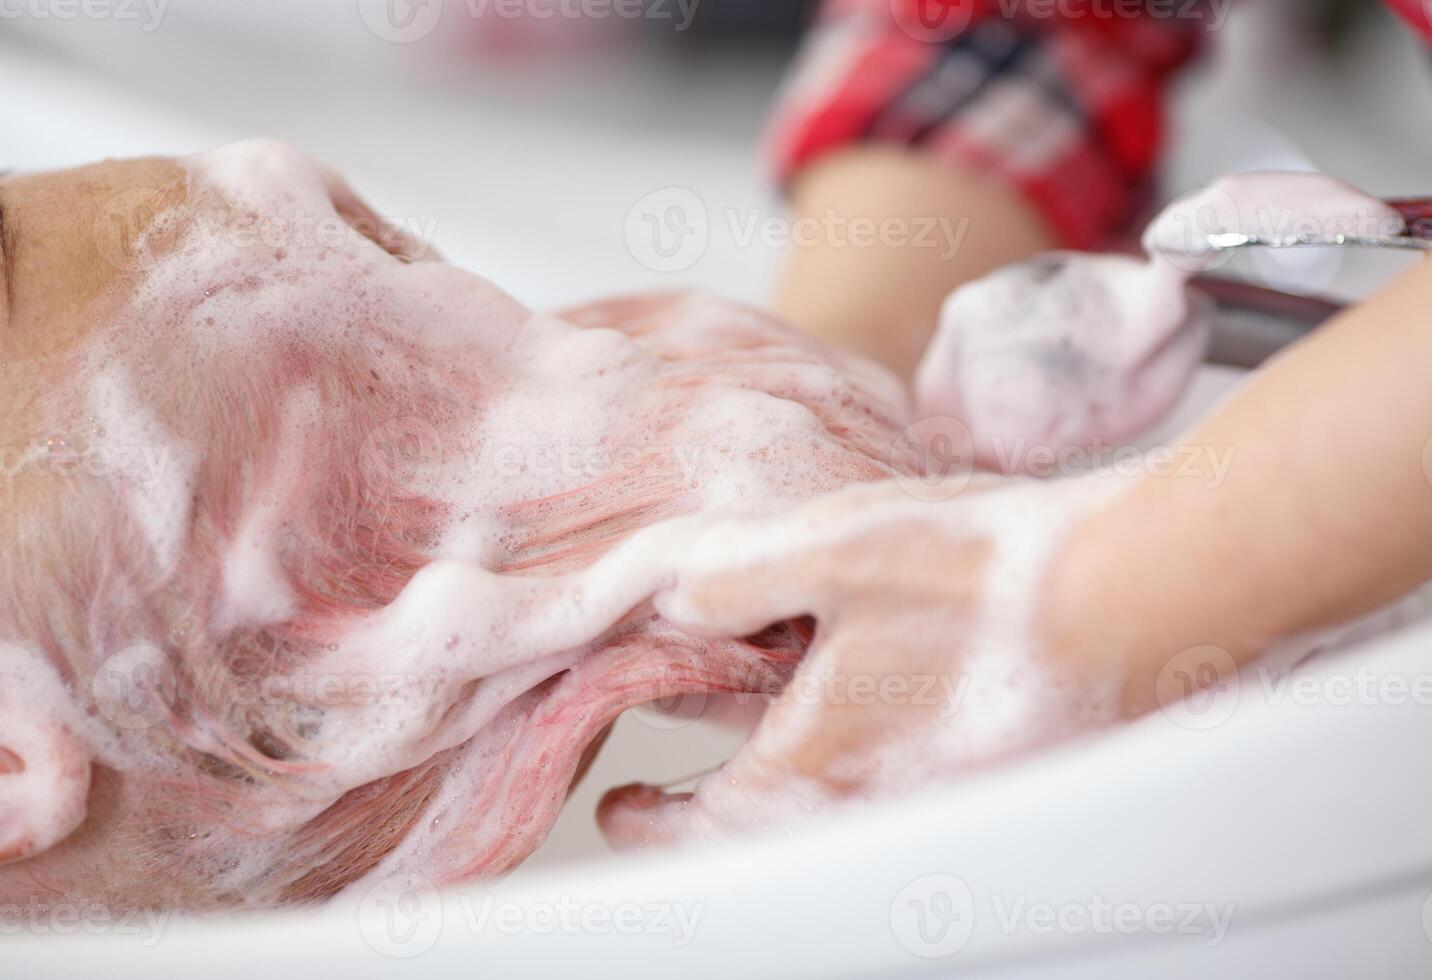 hairdresser's hands washing the client's pink hair with foam shampoo at the barber shop. High quality photo